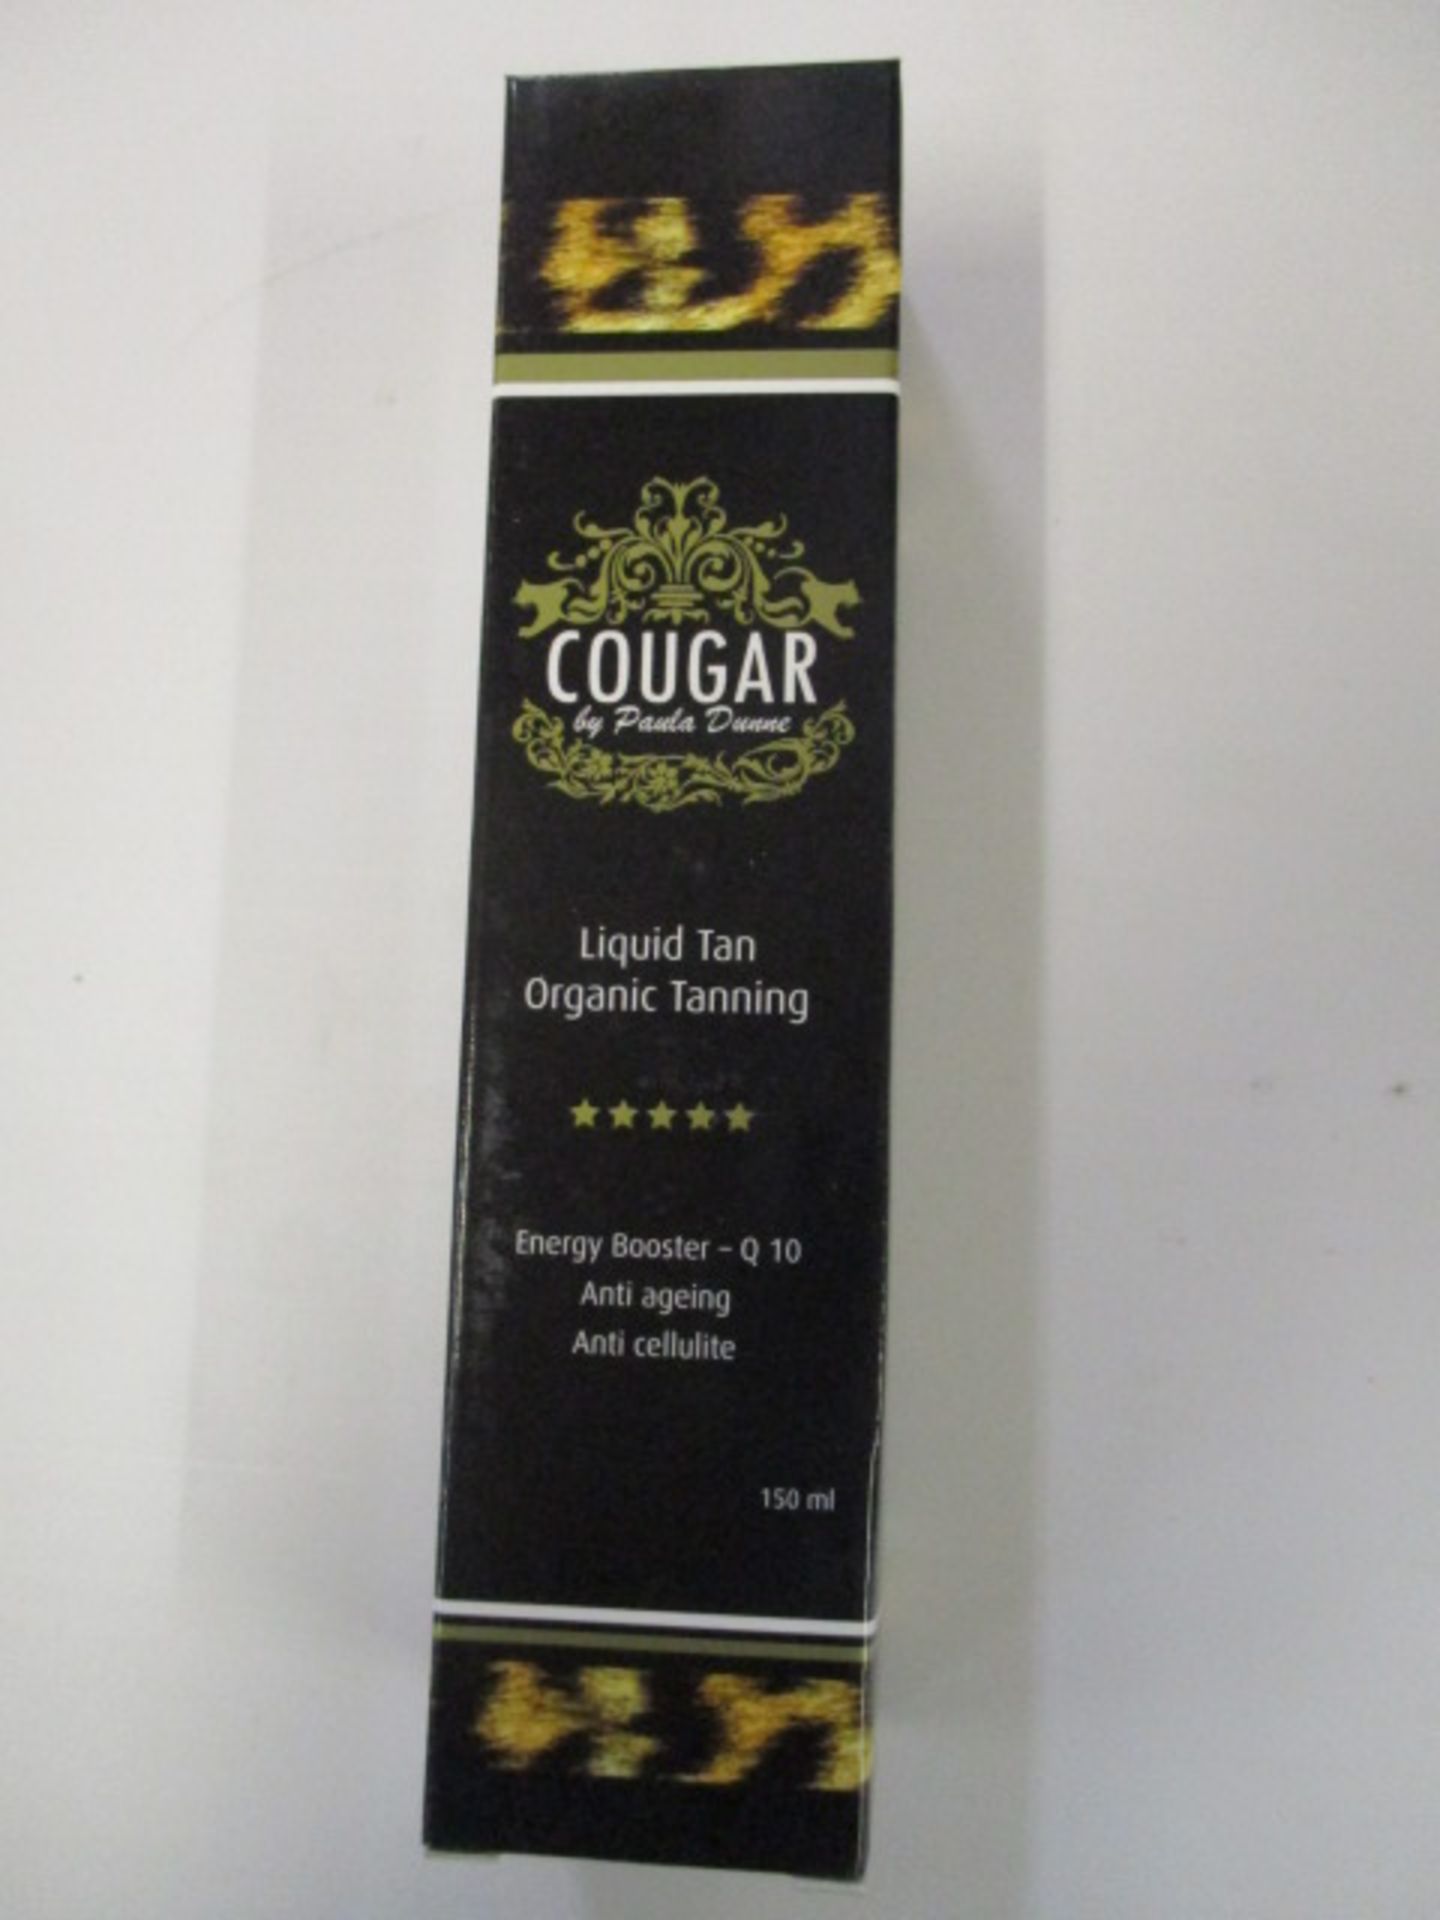 Liquid Tan Organic Tanning spray From the Cougar Make up range - a selection of premium make up